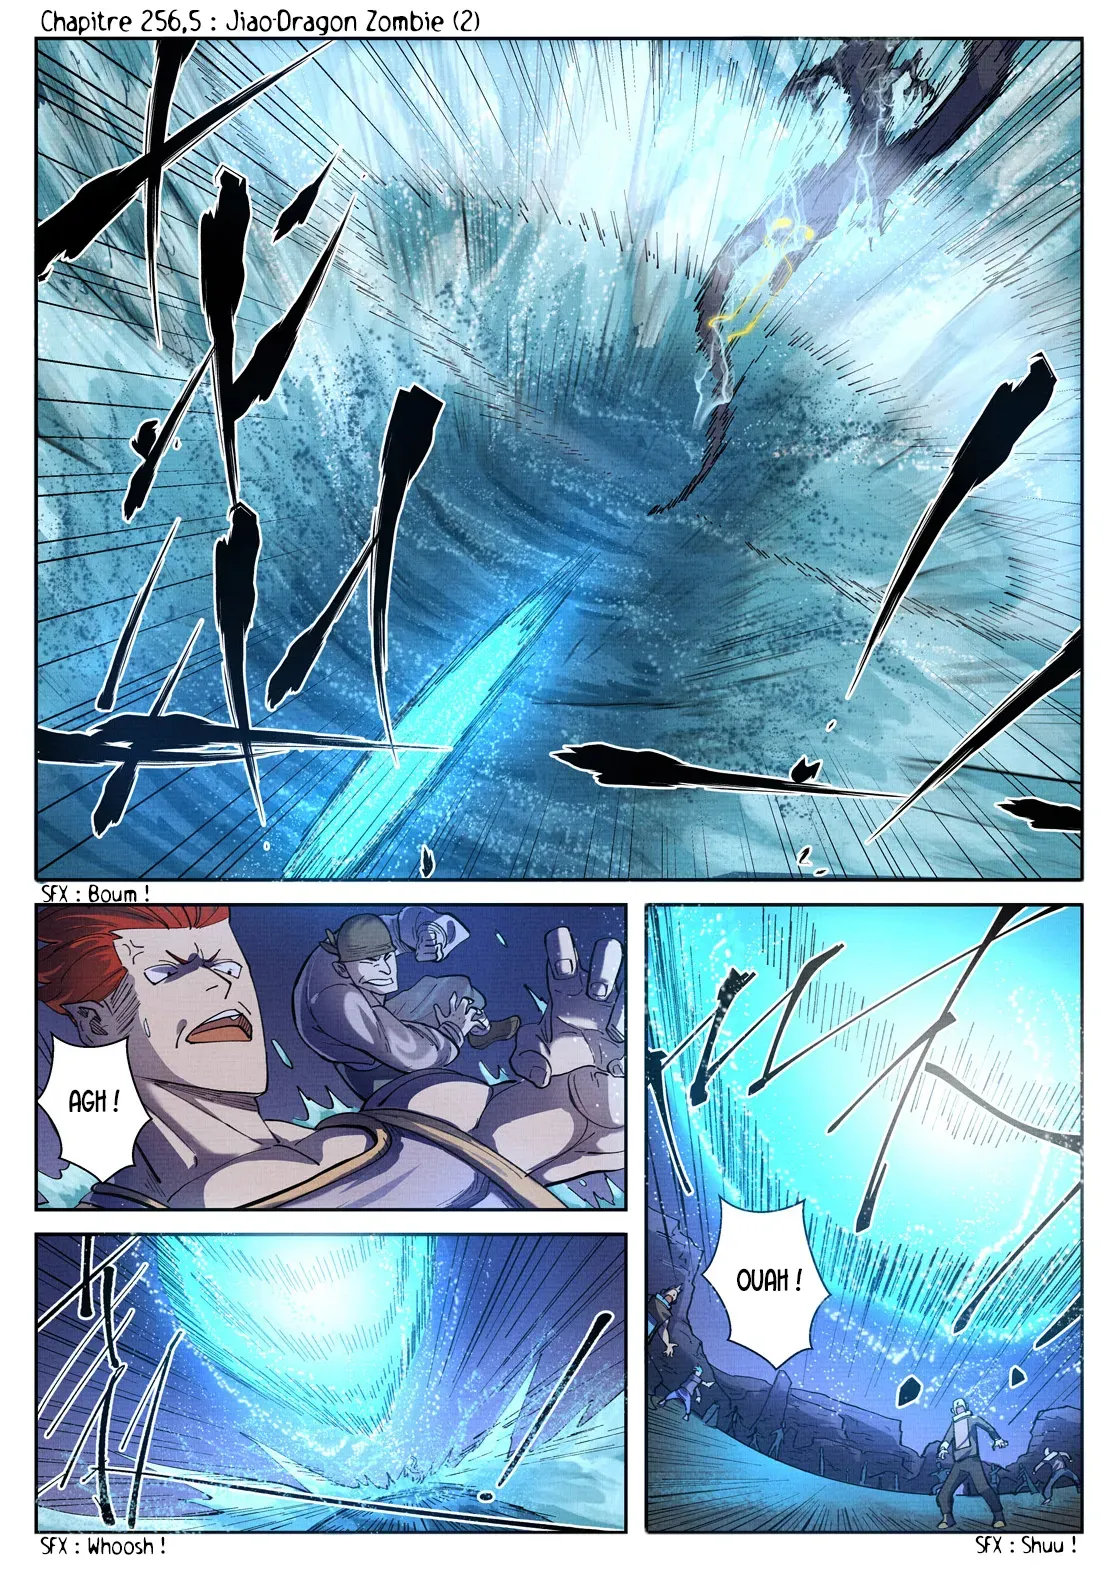 Tales Of Demons And Gods: Chapter chapitre-256.5 - Page 1